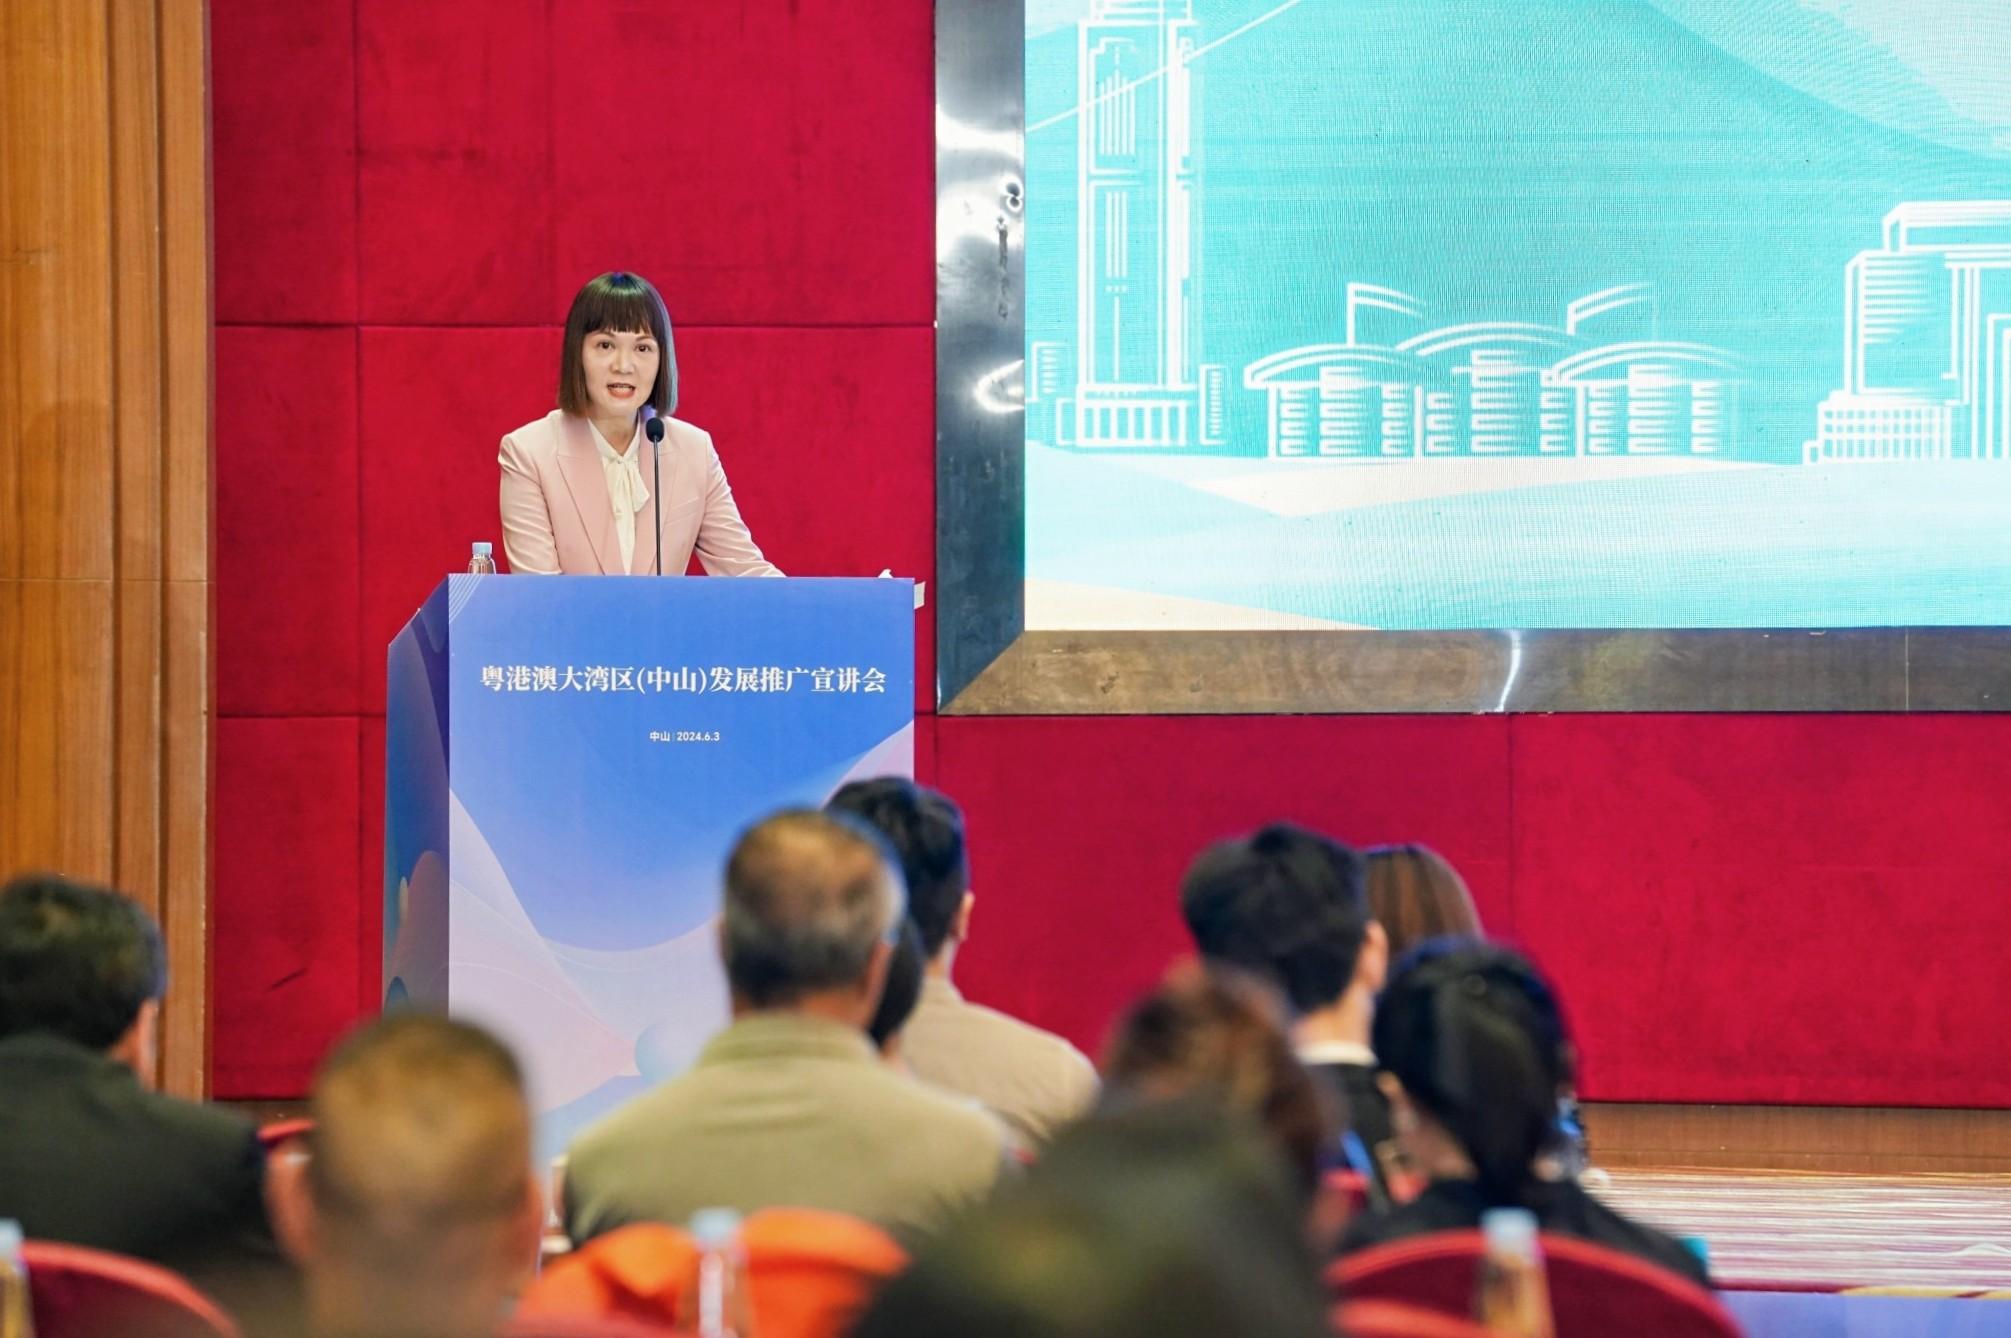 The Commissioner for the Development of the Guangdong-Hong Kong-Macao Greater Bay Area, Ms Maisie Chan, delivers a speech at the Symposium for Promoting the Development of the Guangdong-Hong Kong-Macao Greater Bay Area in Zhongshan today (June 3).  